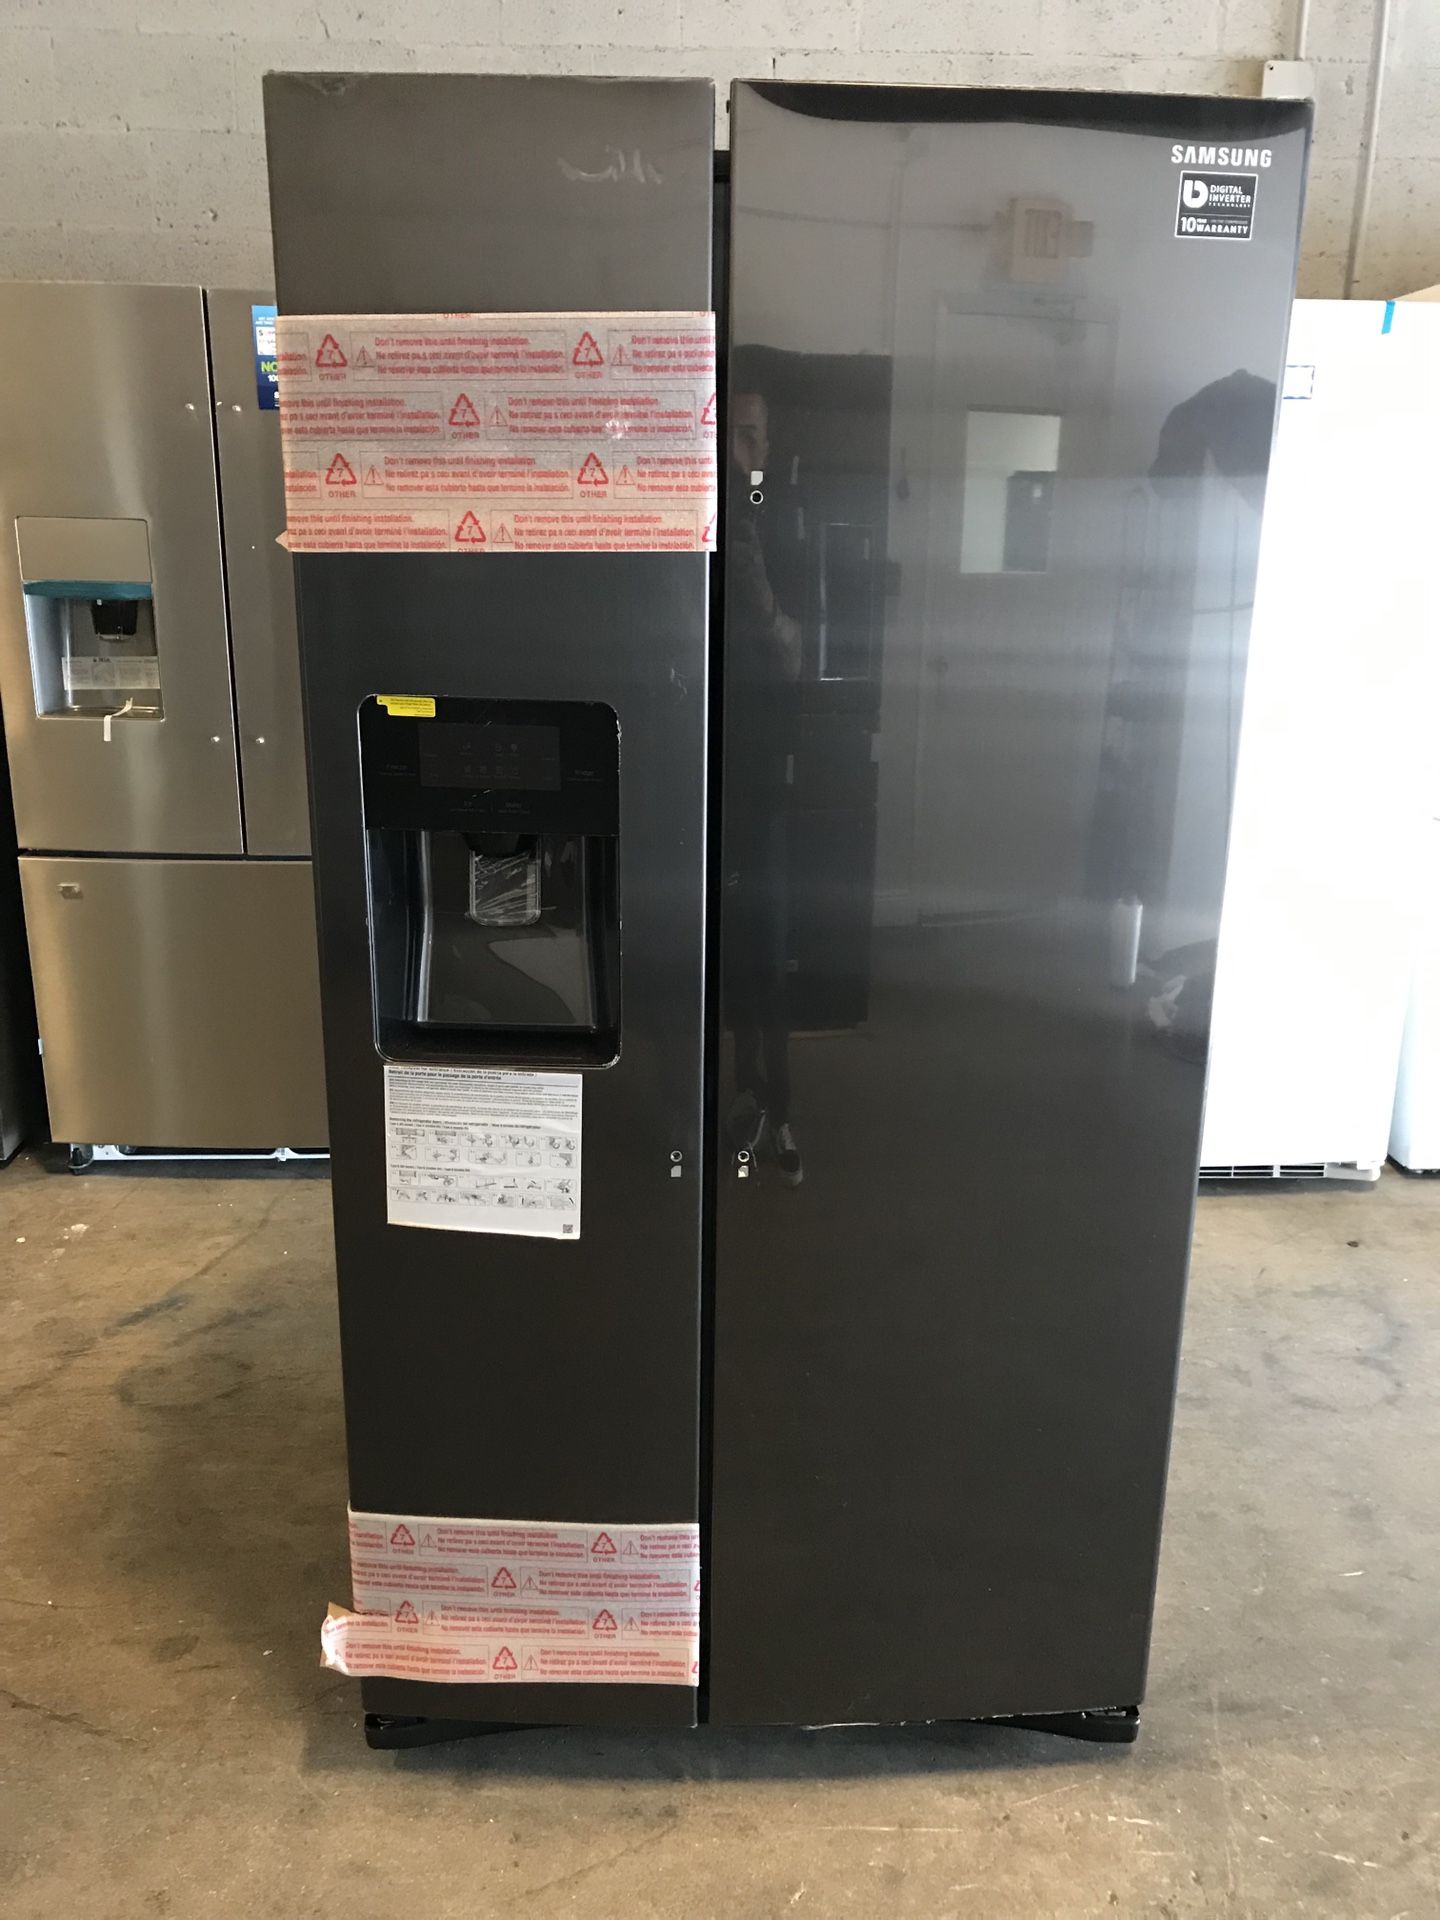 Samsung 24.5 cu. ft. Side-by-Side Refrigerator in Fingerprint Resistant Black Stainless take home with 1 year warranty for $39 down EZ financing